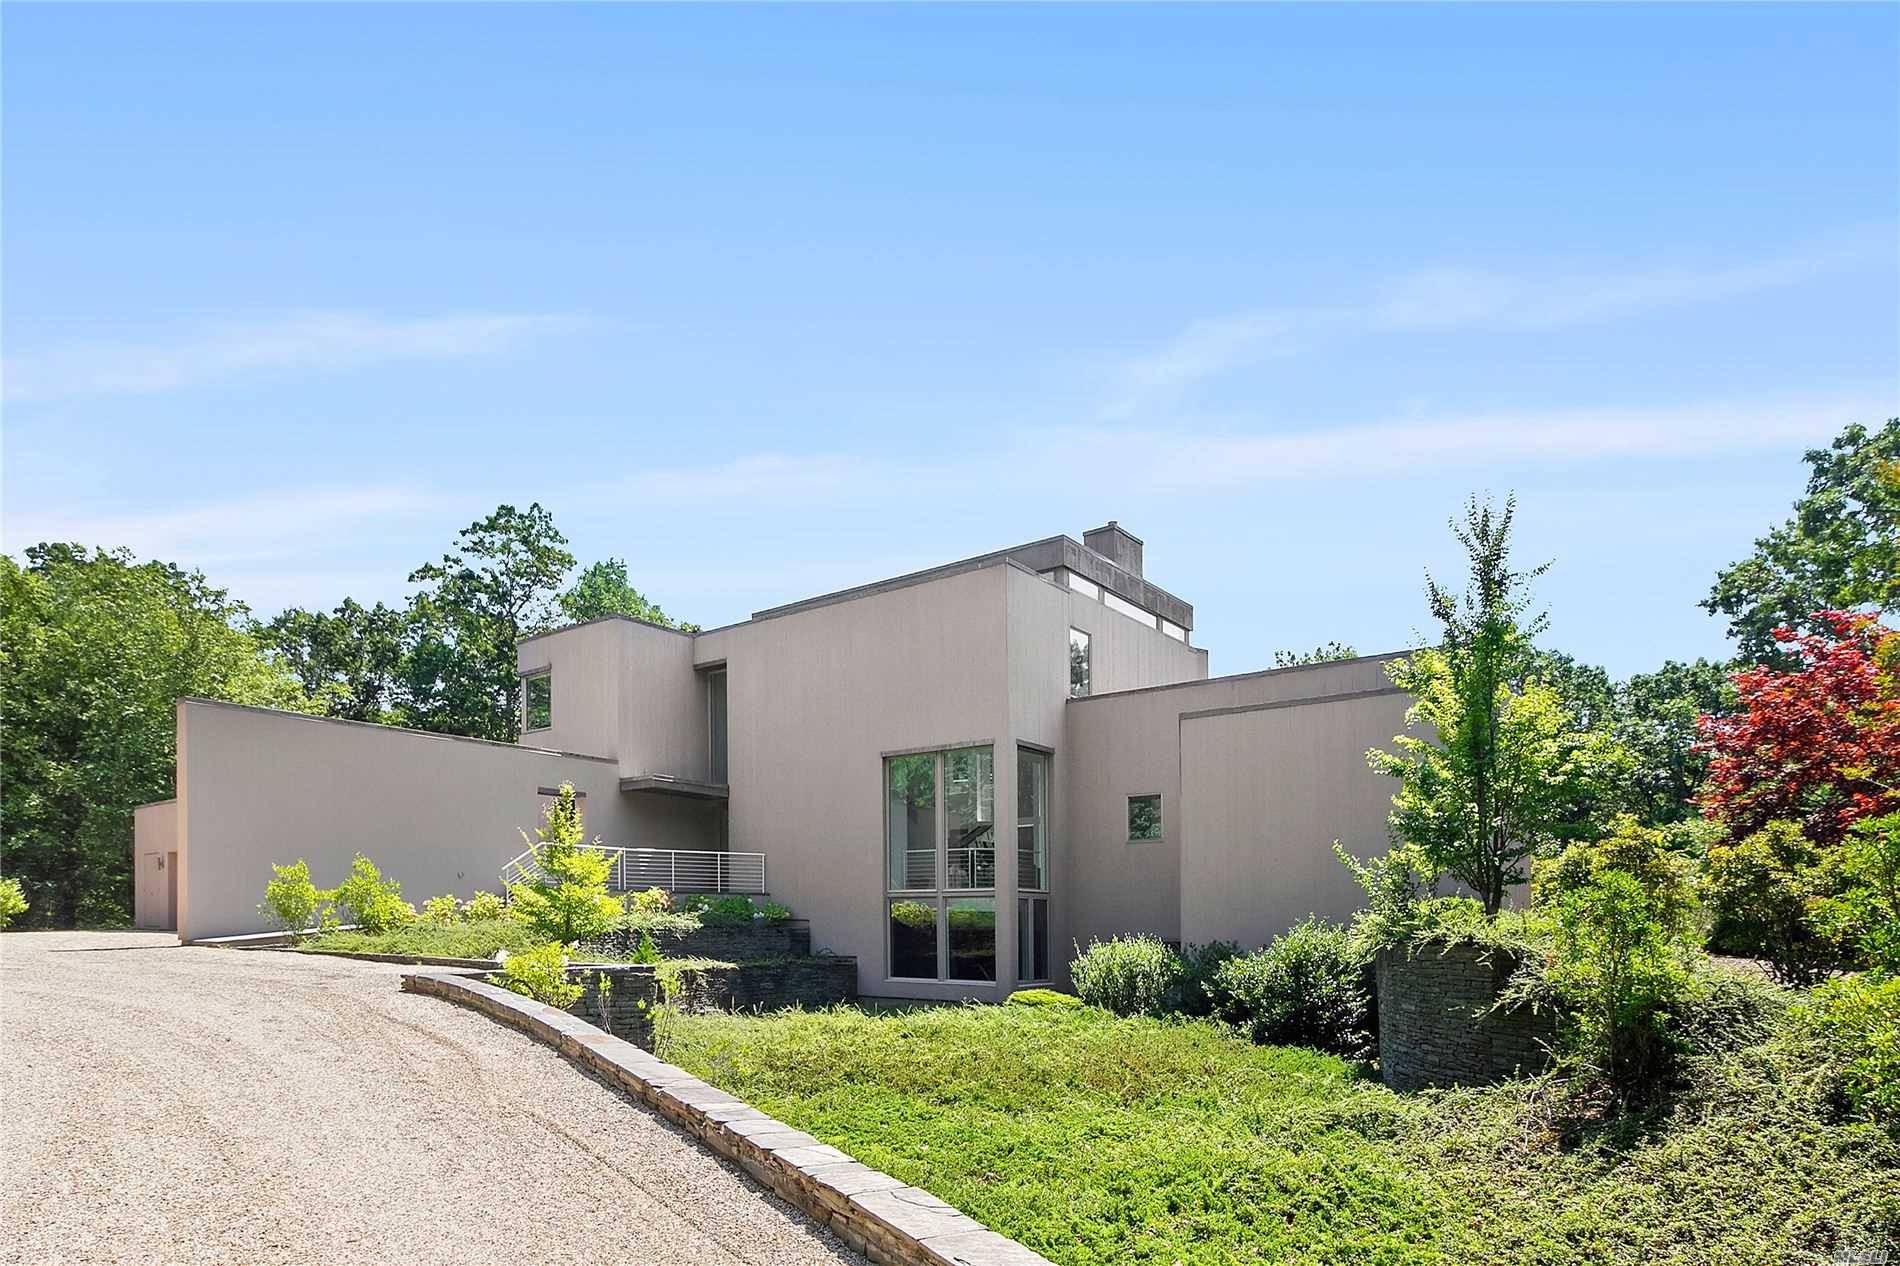 This is a rare opportunity to acquire one of the most beautiful modern homes in East Hampton.